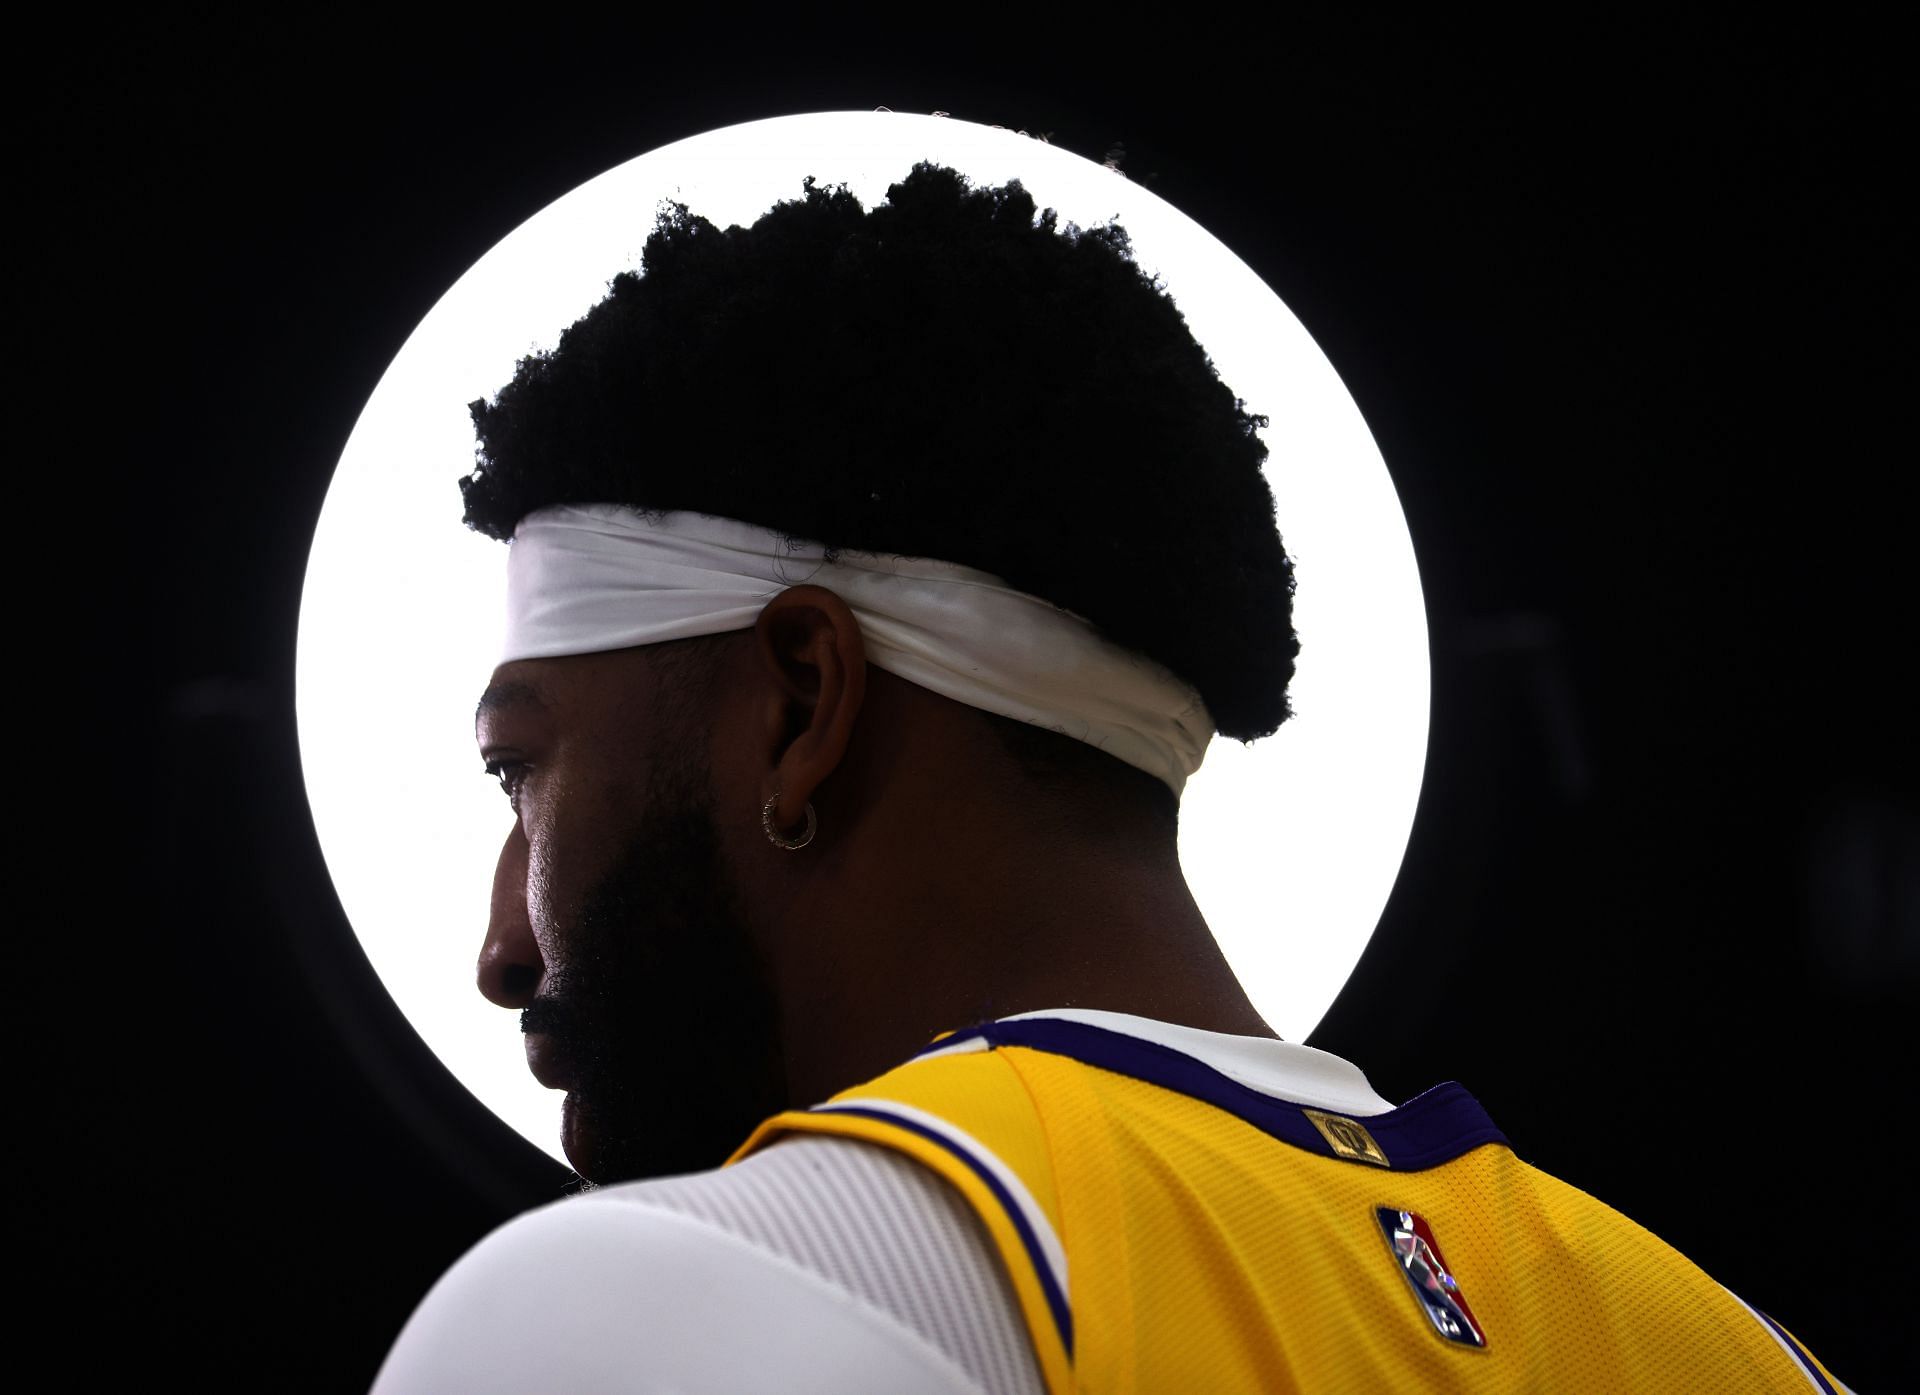 Los Angeles Lakers Media Day